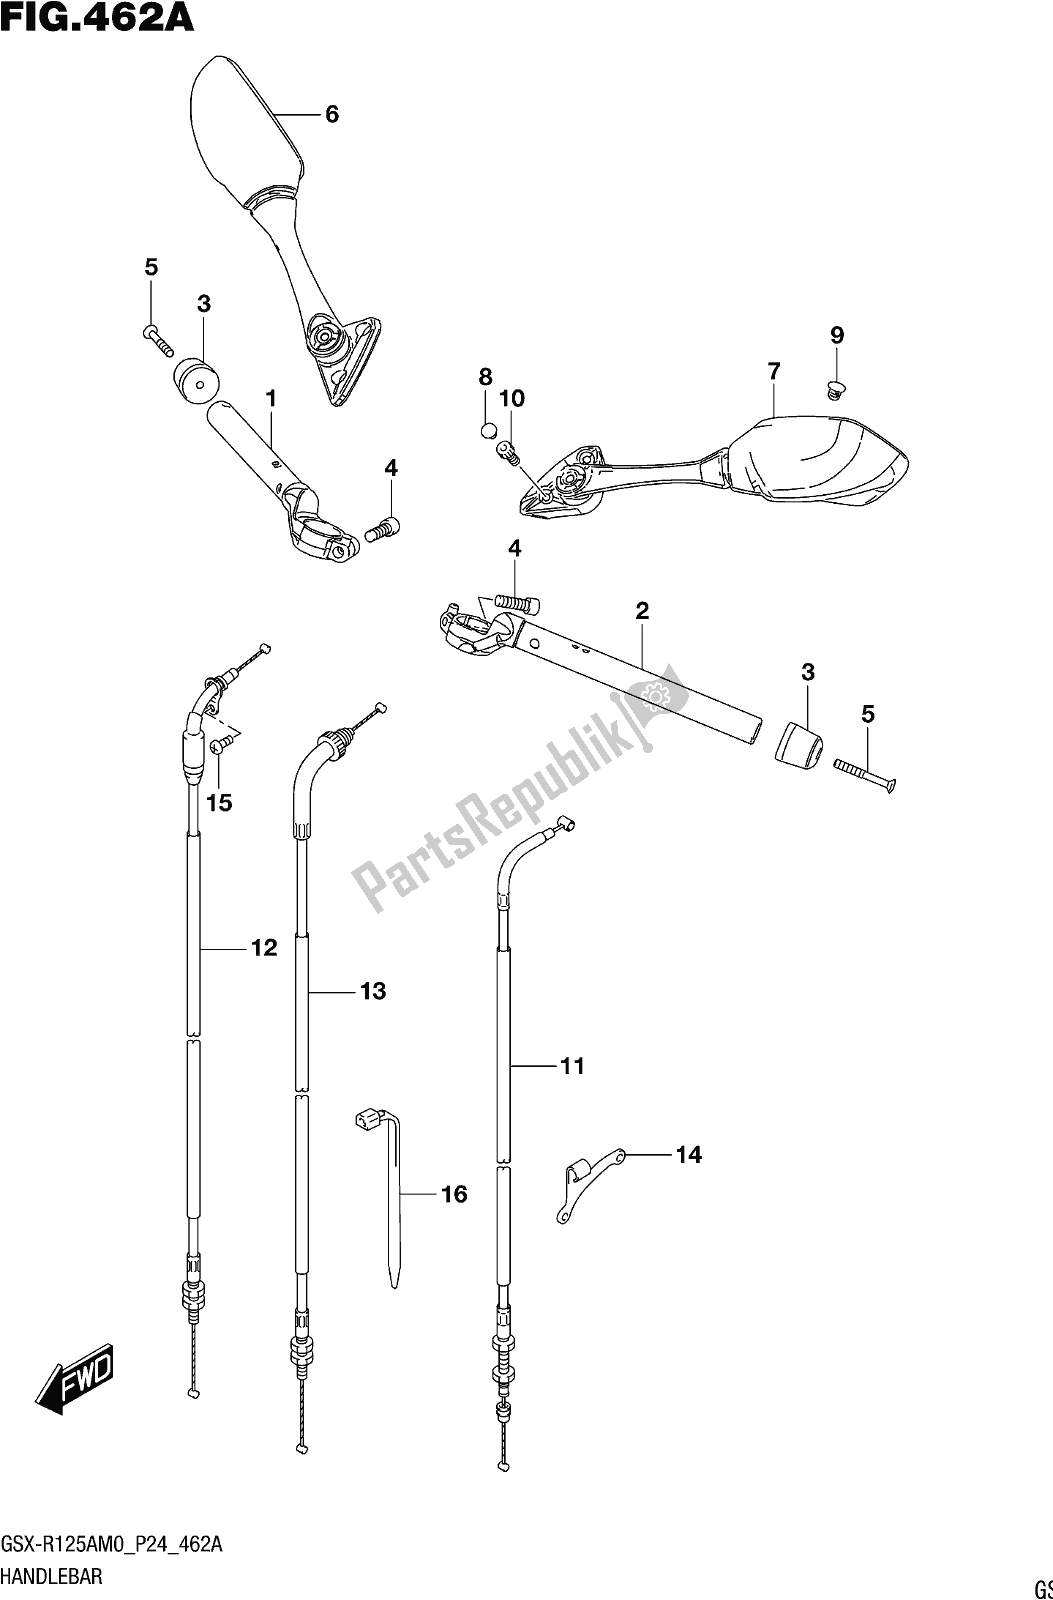 All parts for the Fig. 462a Handlebar of the Suzuki Gsx-r 125A 2020